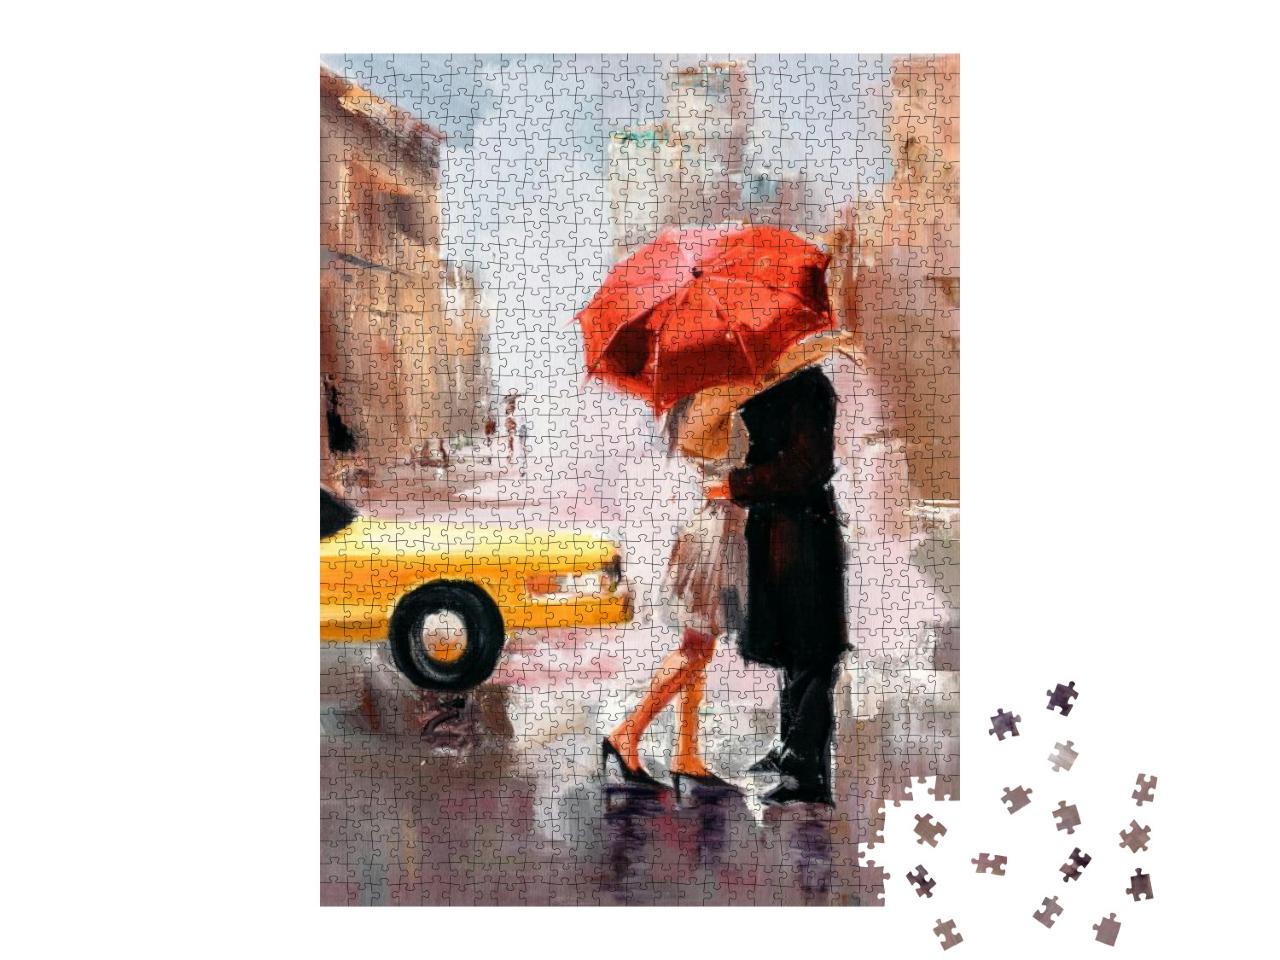 Oil Painting - Dating Couple... Jigsaw Puzzle with 1000 pieces